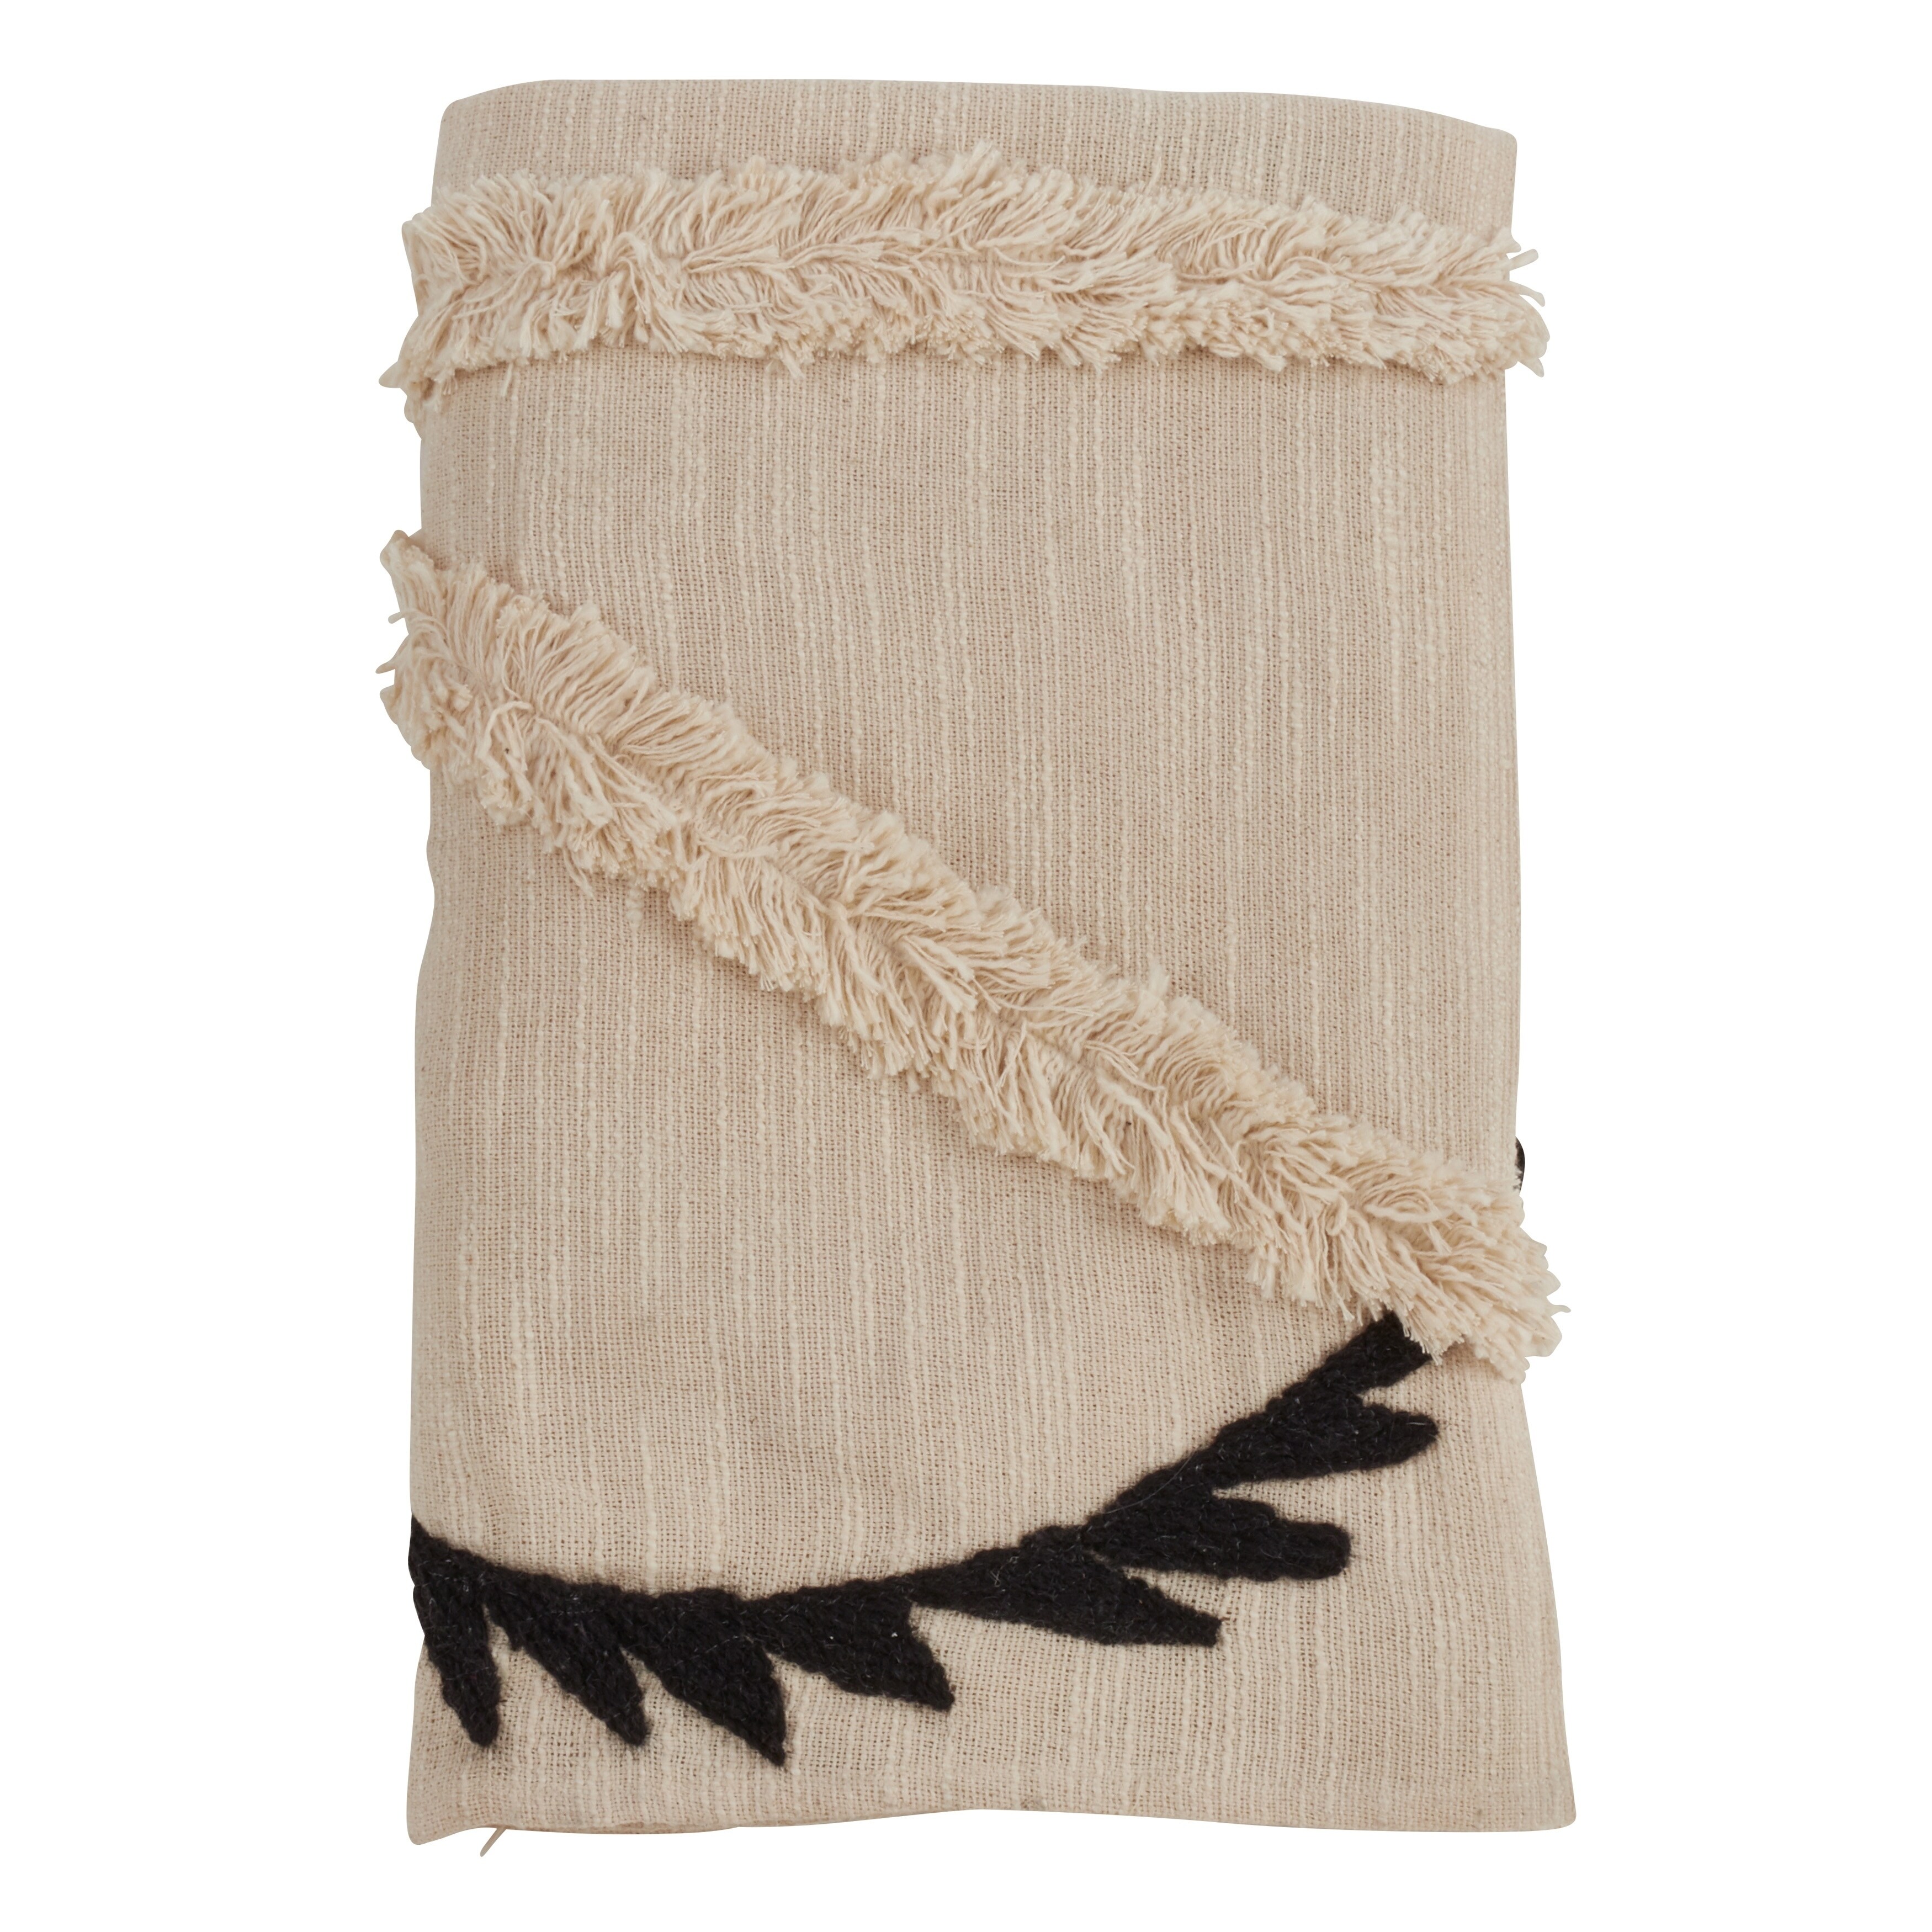 Cotton Throw Blanket With Embroidered Fringe Design On Sale Overstock 29349884